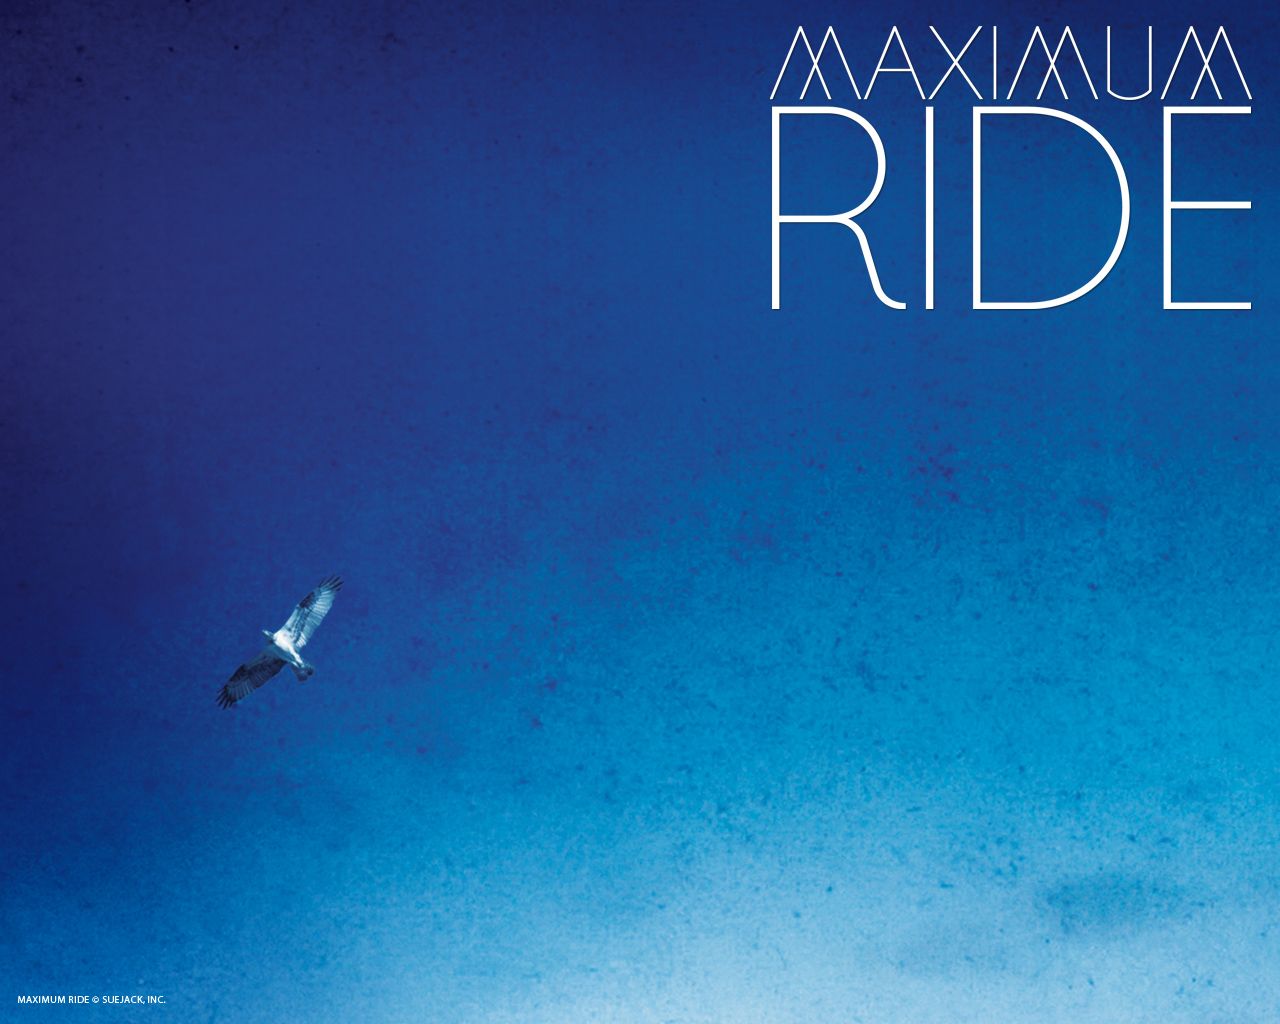 Maximum Ride | Free Downloads - Wallpapers, Buddy icons and more!